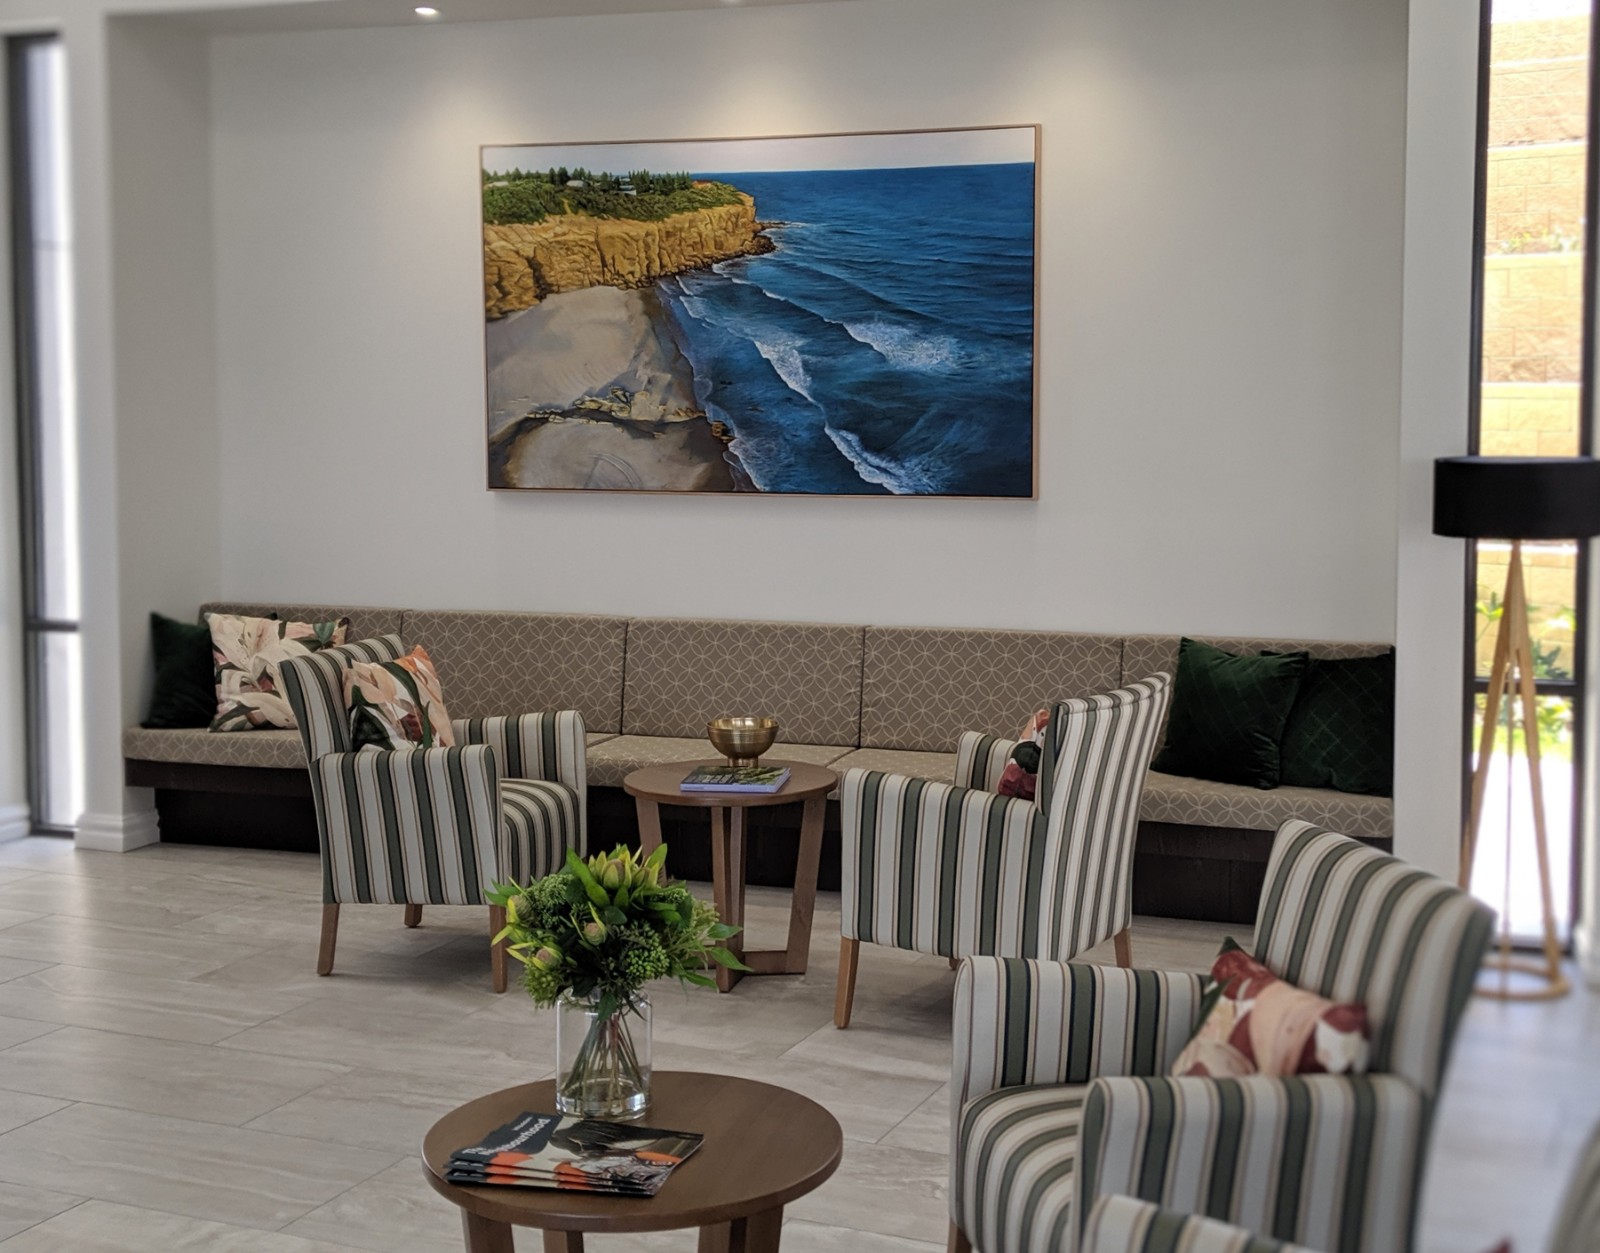 Newcastle aged care home entrance foyer with artwork and seating